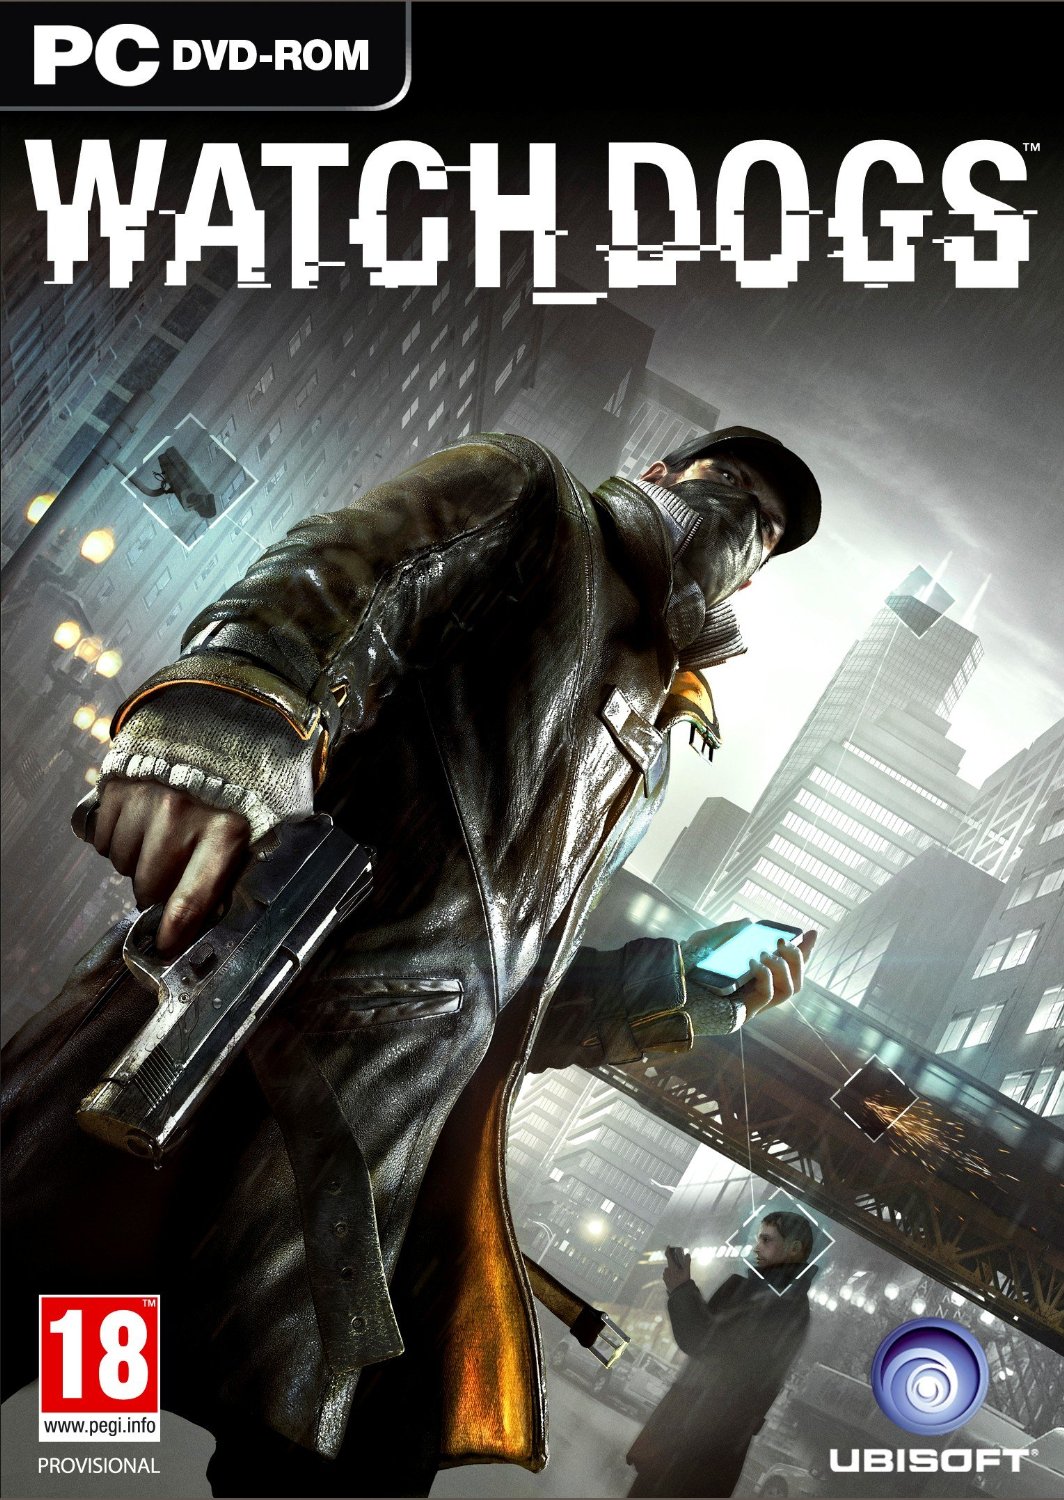 Watch Dogs Deluxe Edition CD Key for Uplay - 